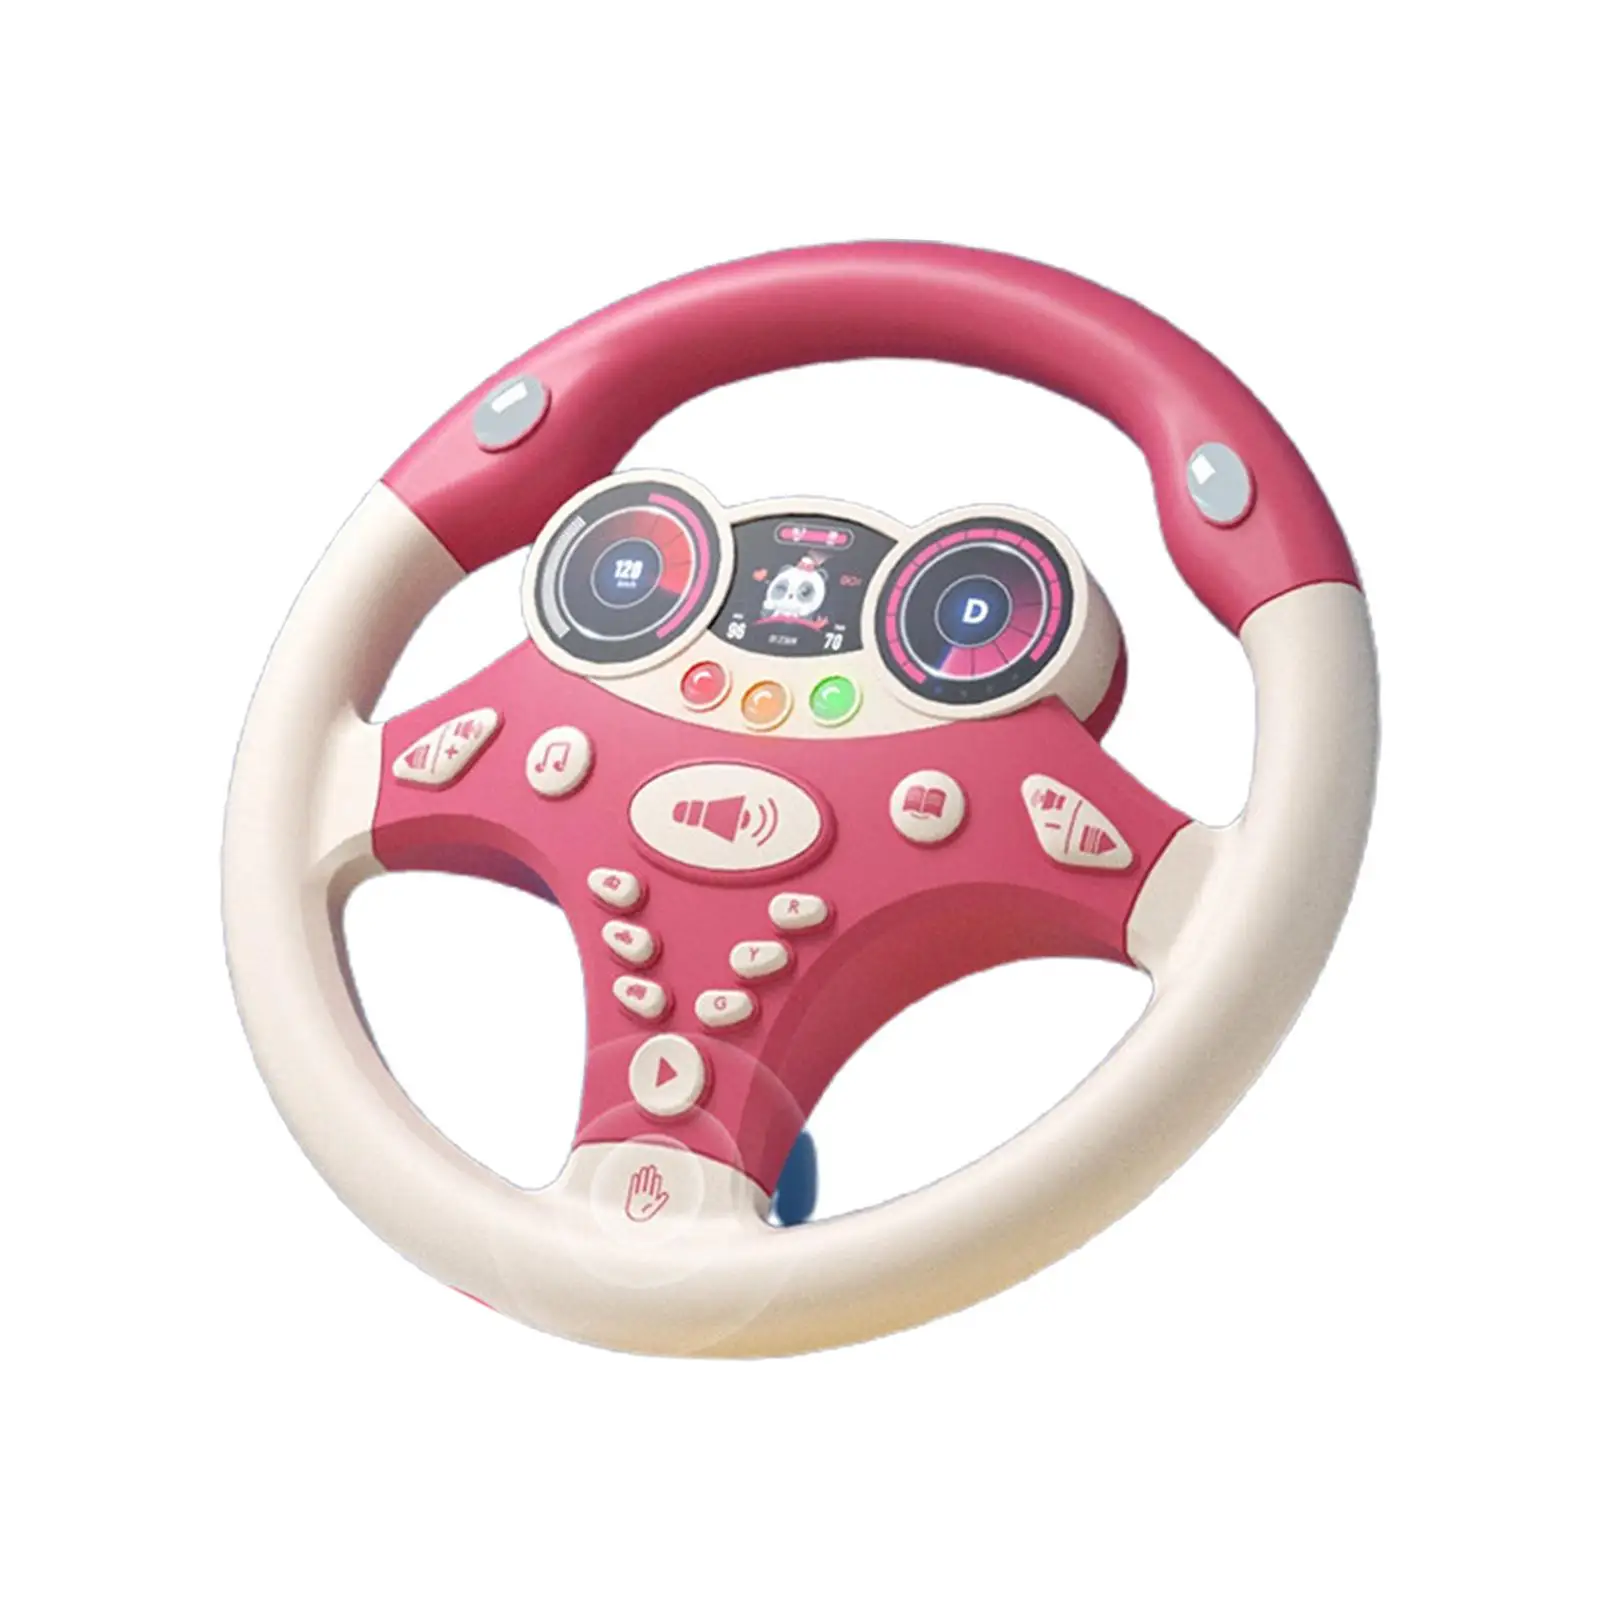 Multifunctional Electric Steering Wheel Toy Portable Car Driving Toy for Kids